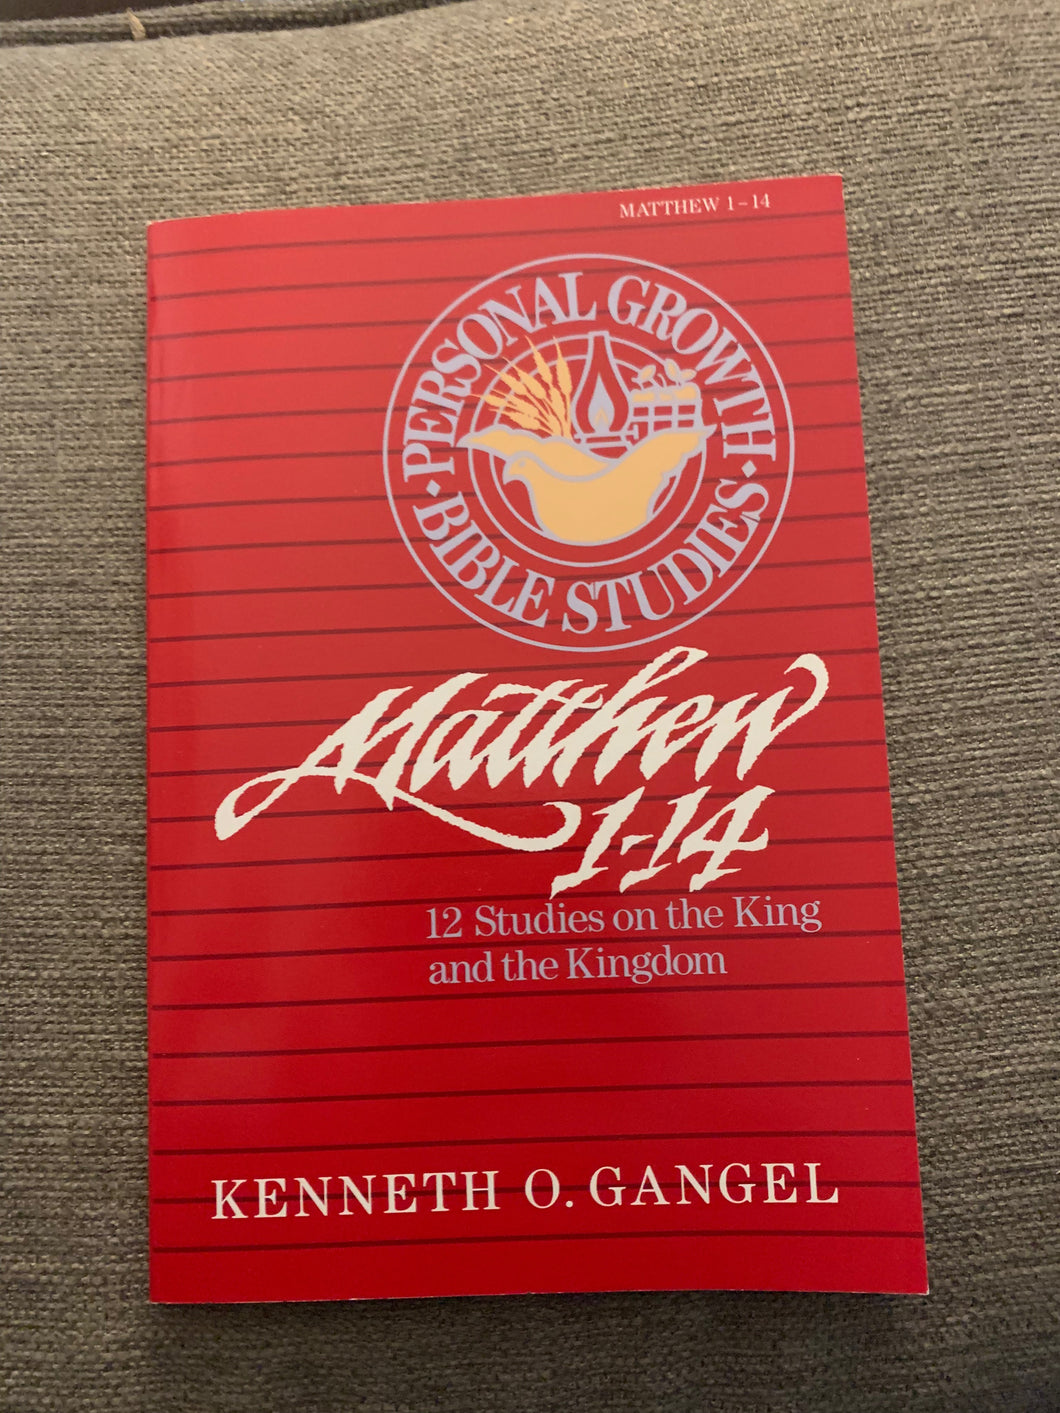 Matthew 1:14: 12 Studies on the King and the Kingdom by Kenneth O. Gangel